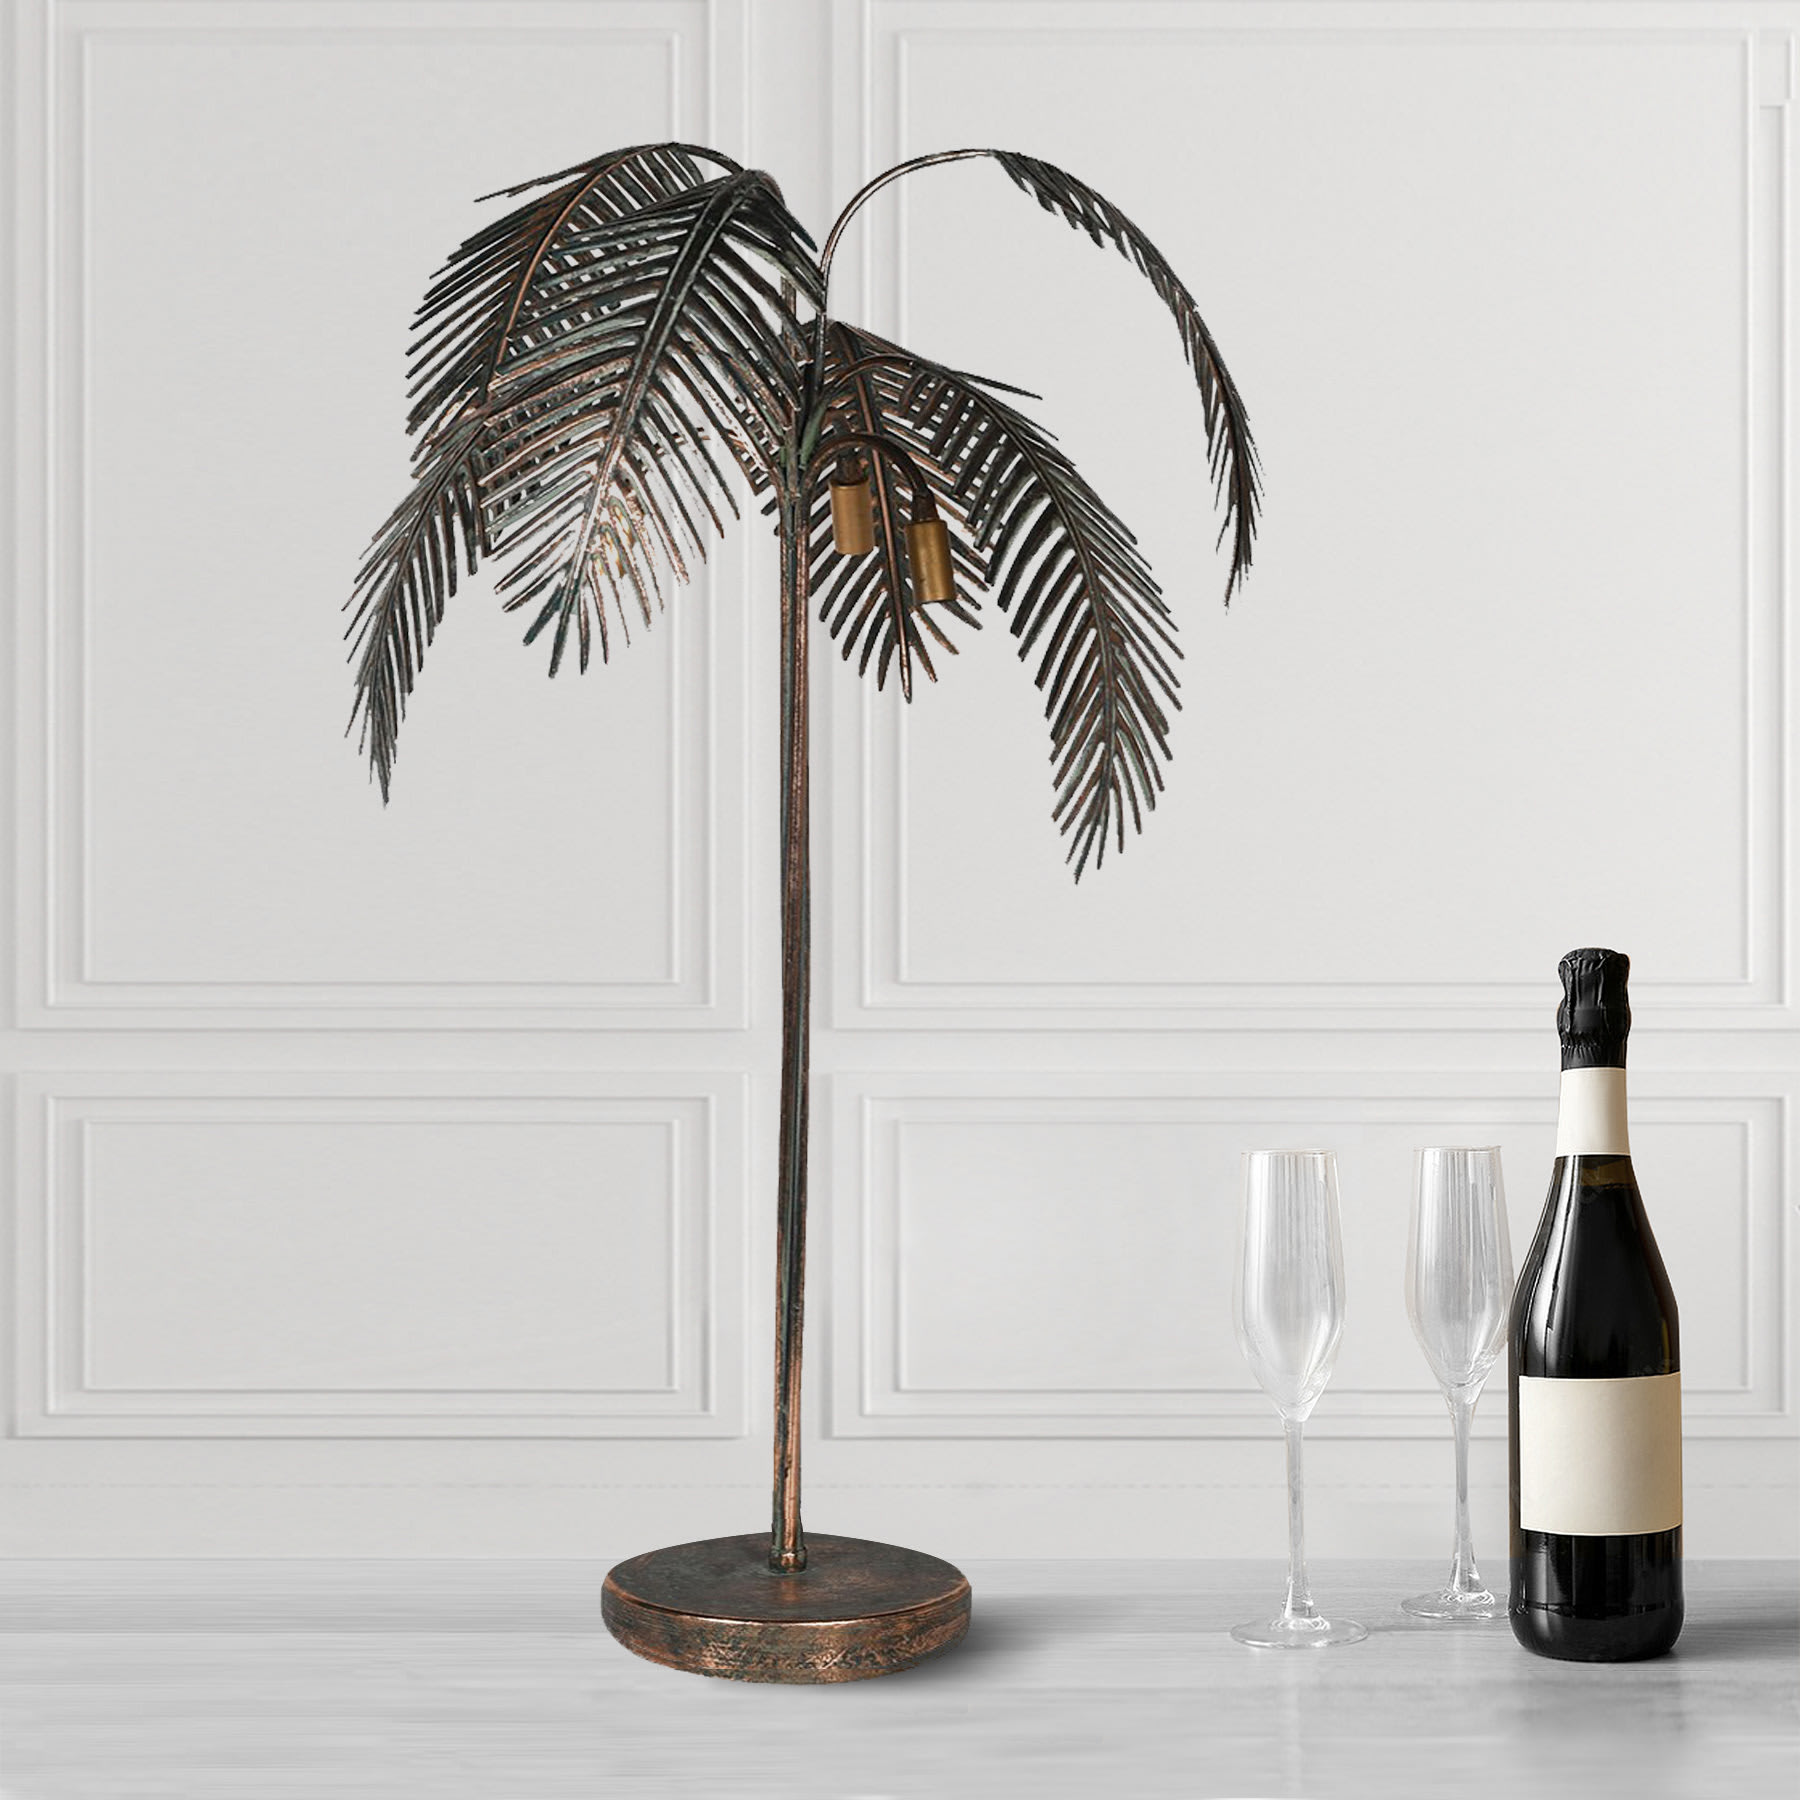 Aged Golden Palm Tree Table Lamp